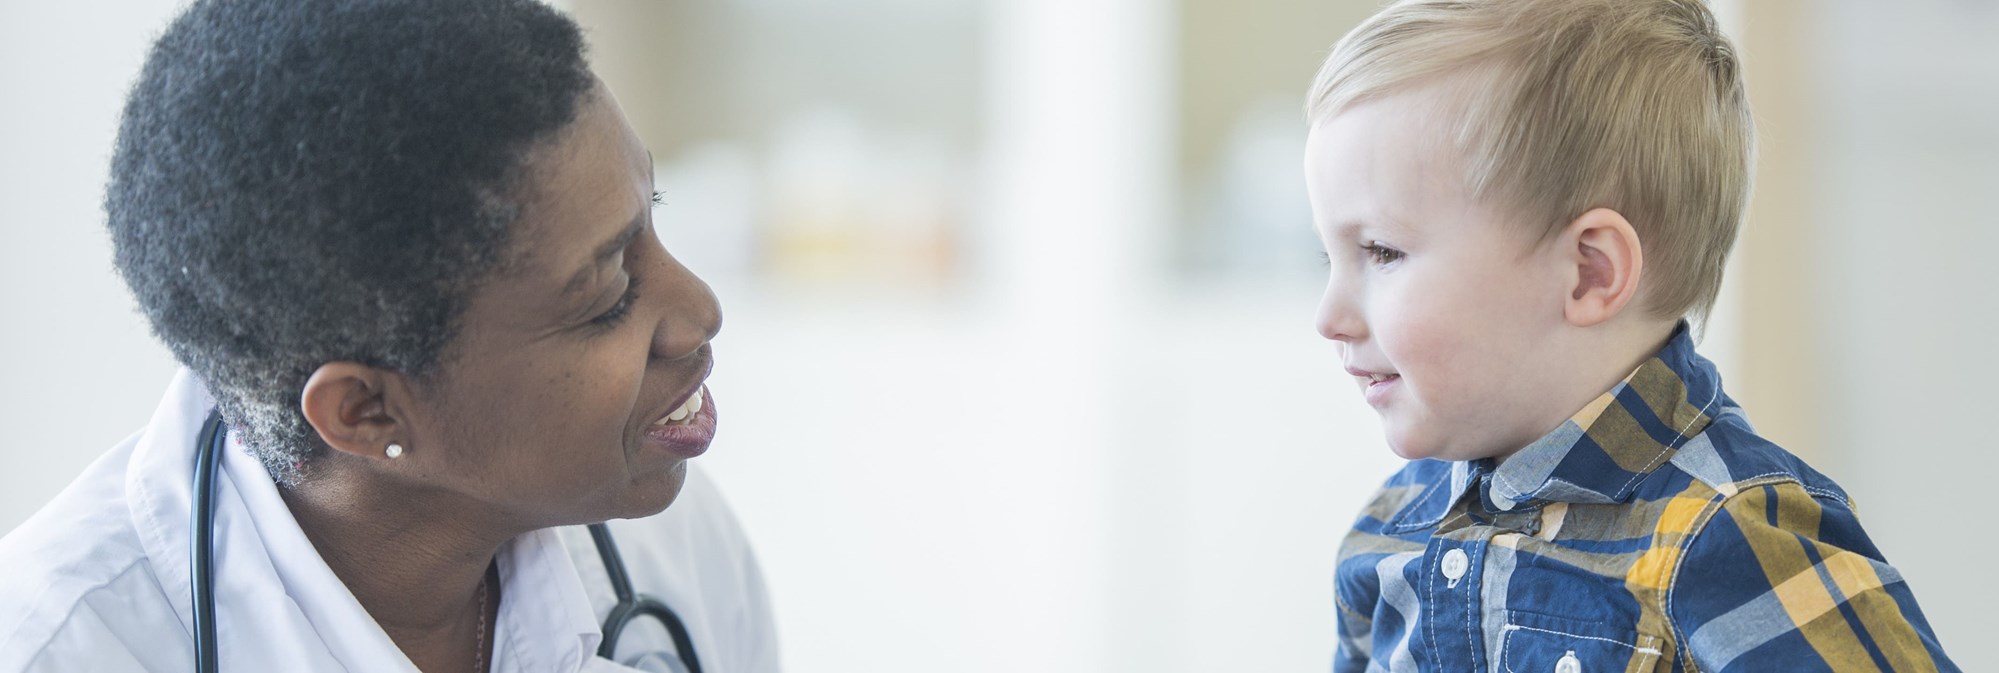 profile view of doctor and young patient looking at each other